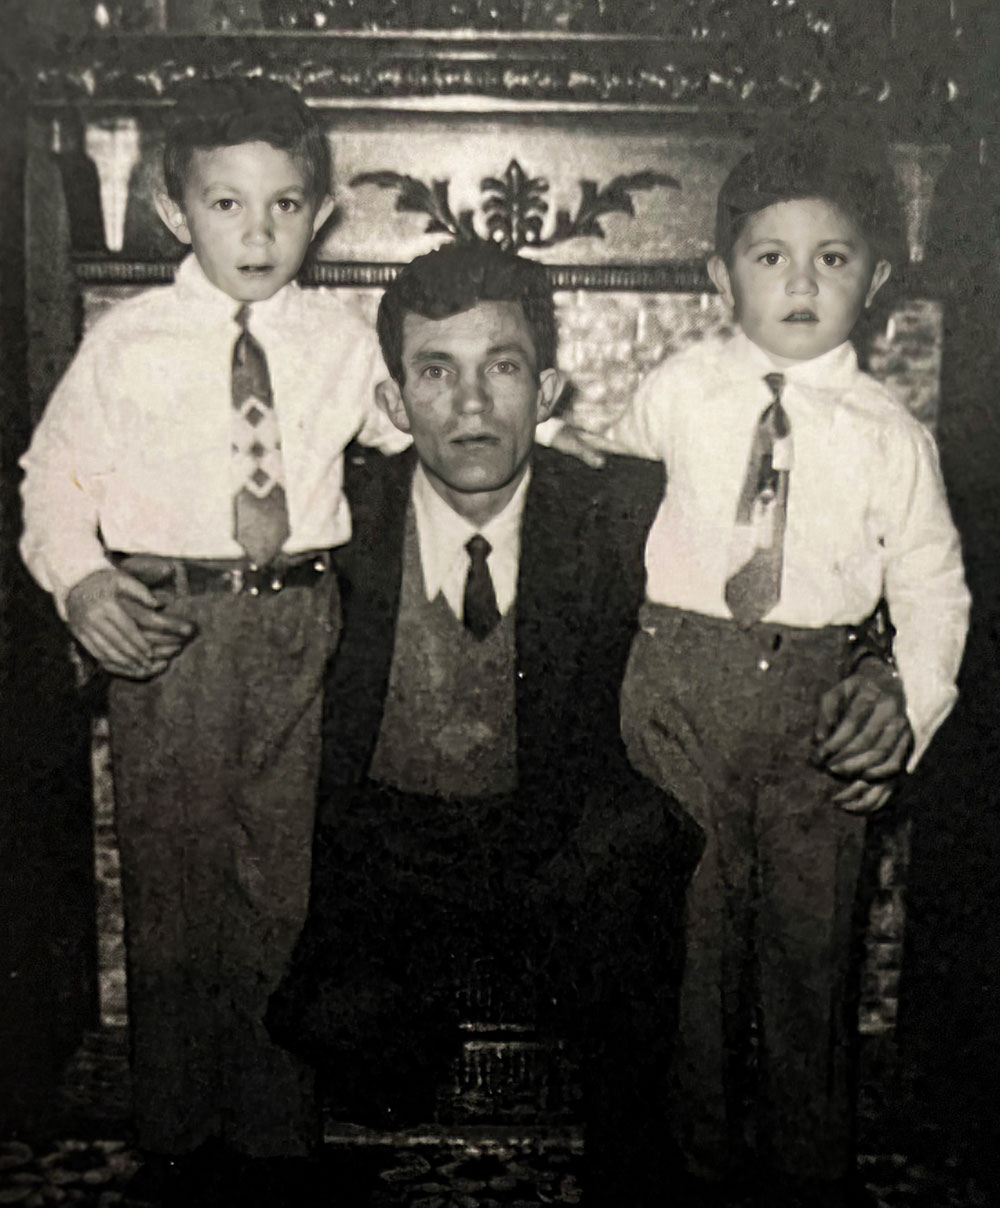 An old black and white photo. Alain Raoul, centre, in a suit, flanked by two young boys.